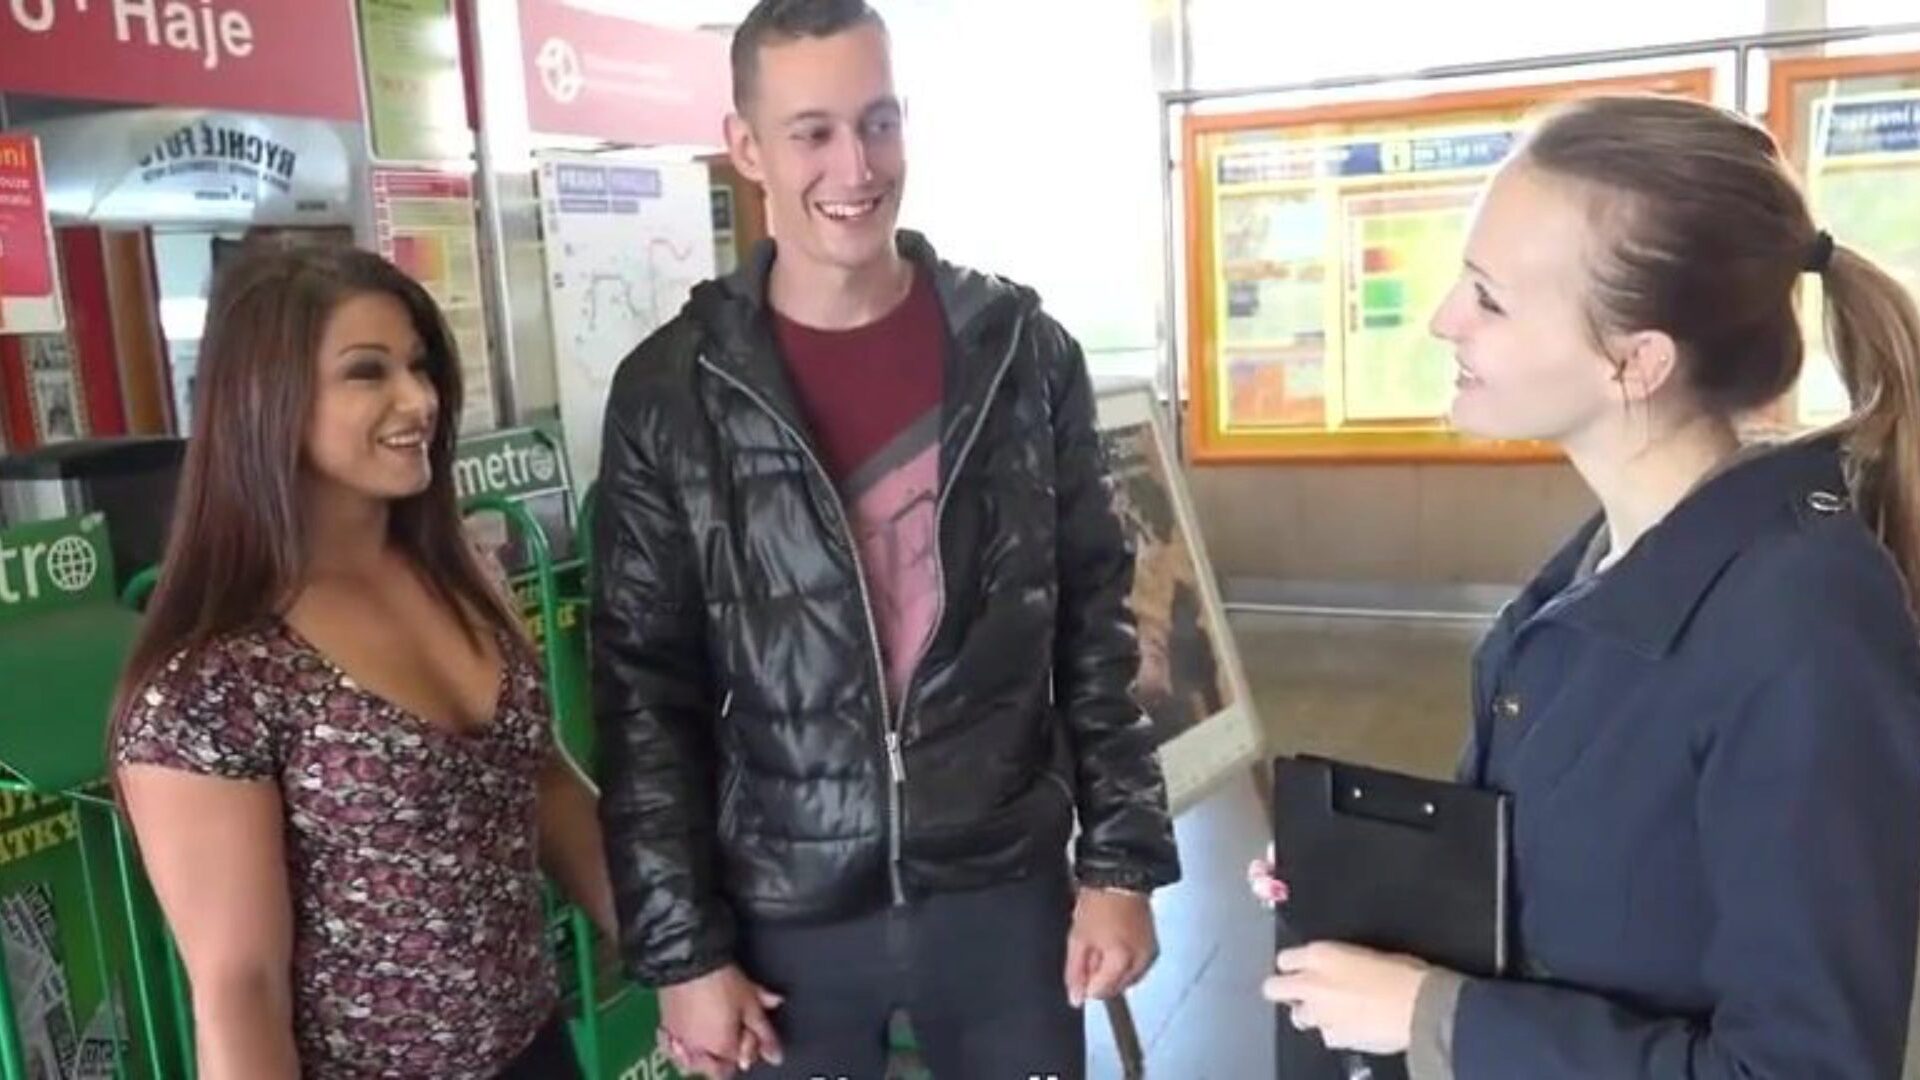 Belle Claire convinces couple to do public hook-up Public reality three-some